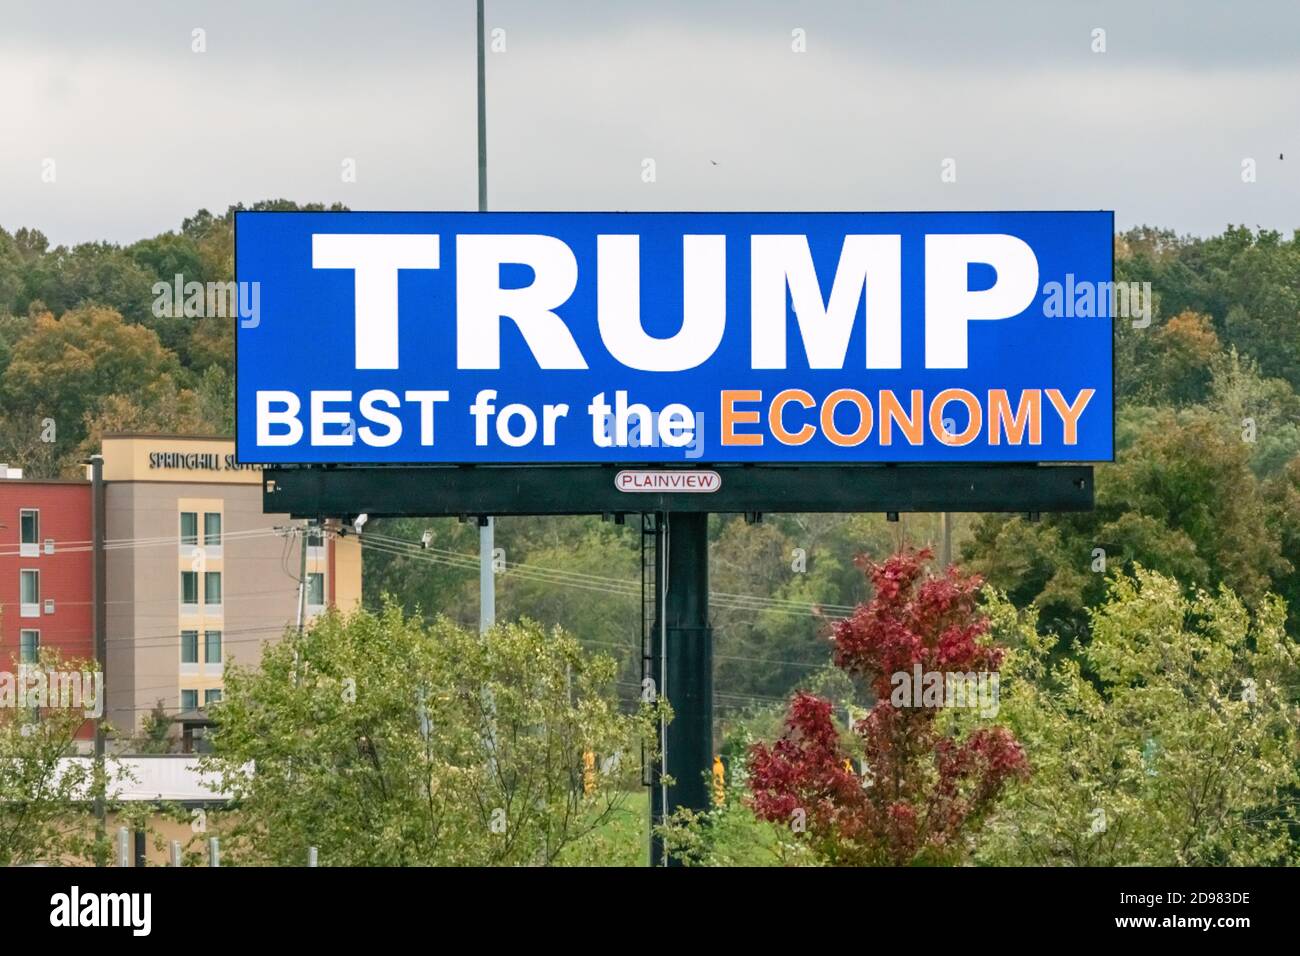 large Trump billboard along the side of the expressway. Mentioning the economy. Stock Photo